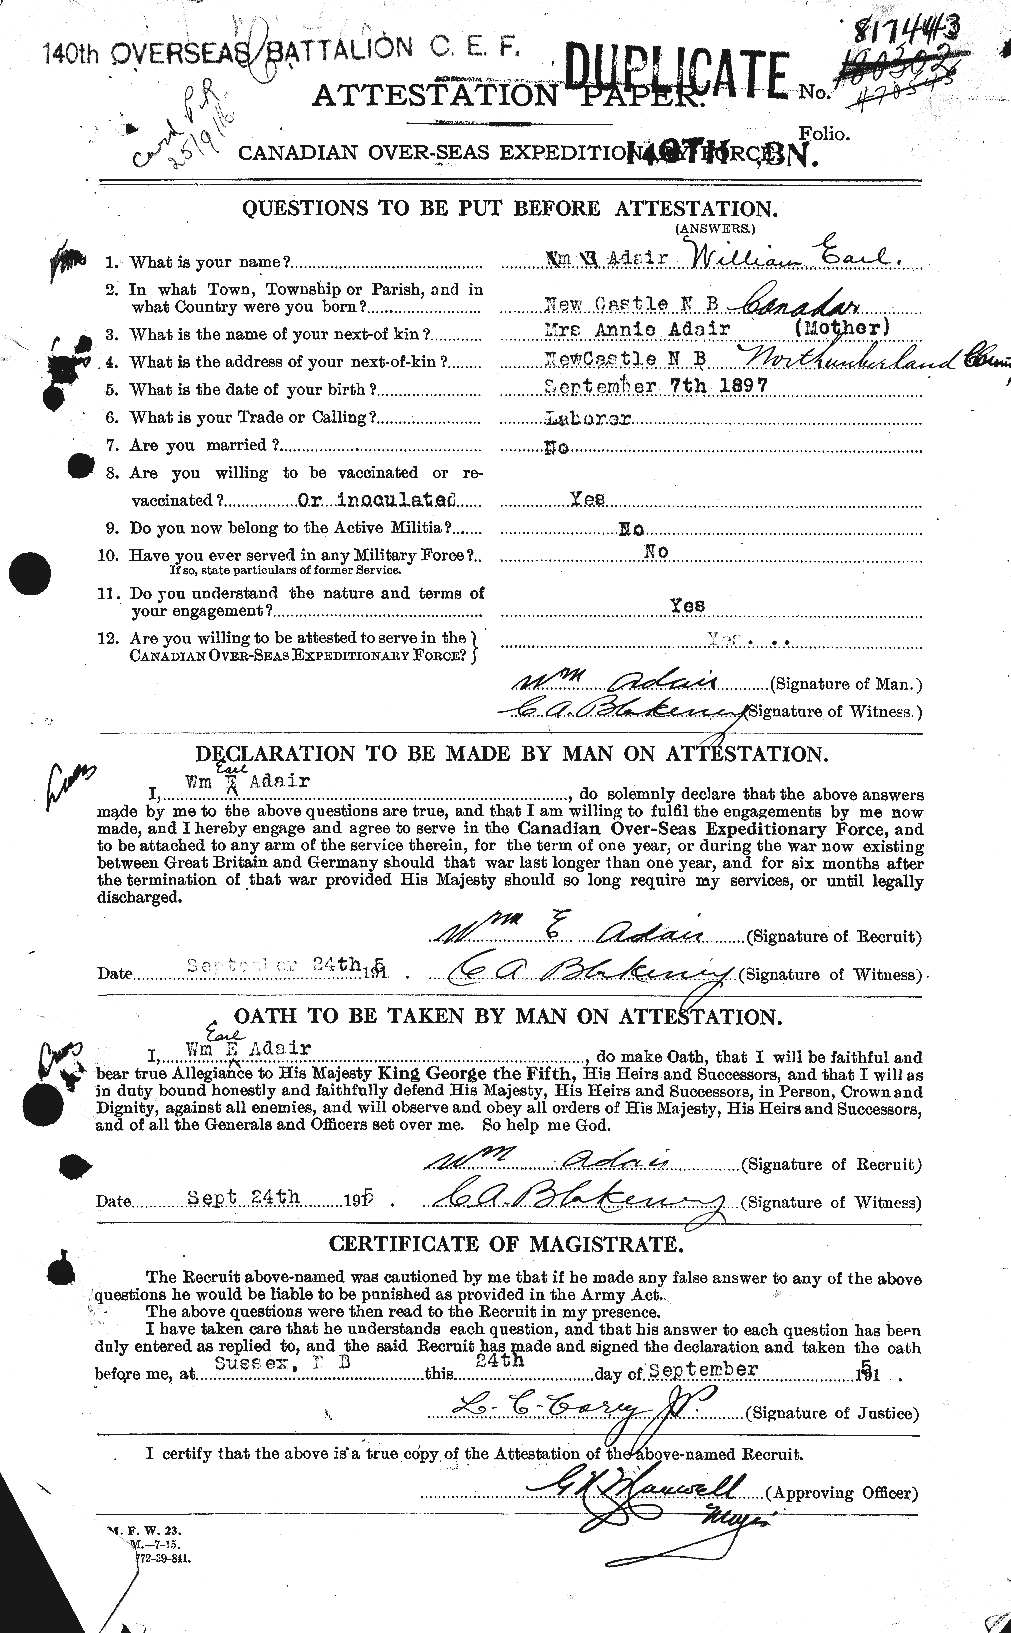 Personnel Records of the First World War - CEF 201185a